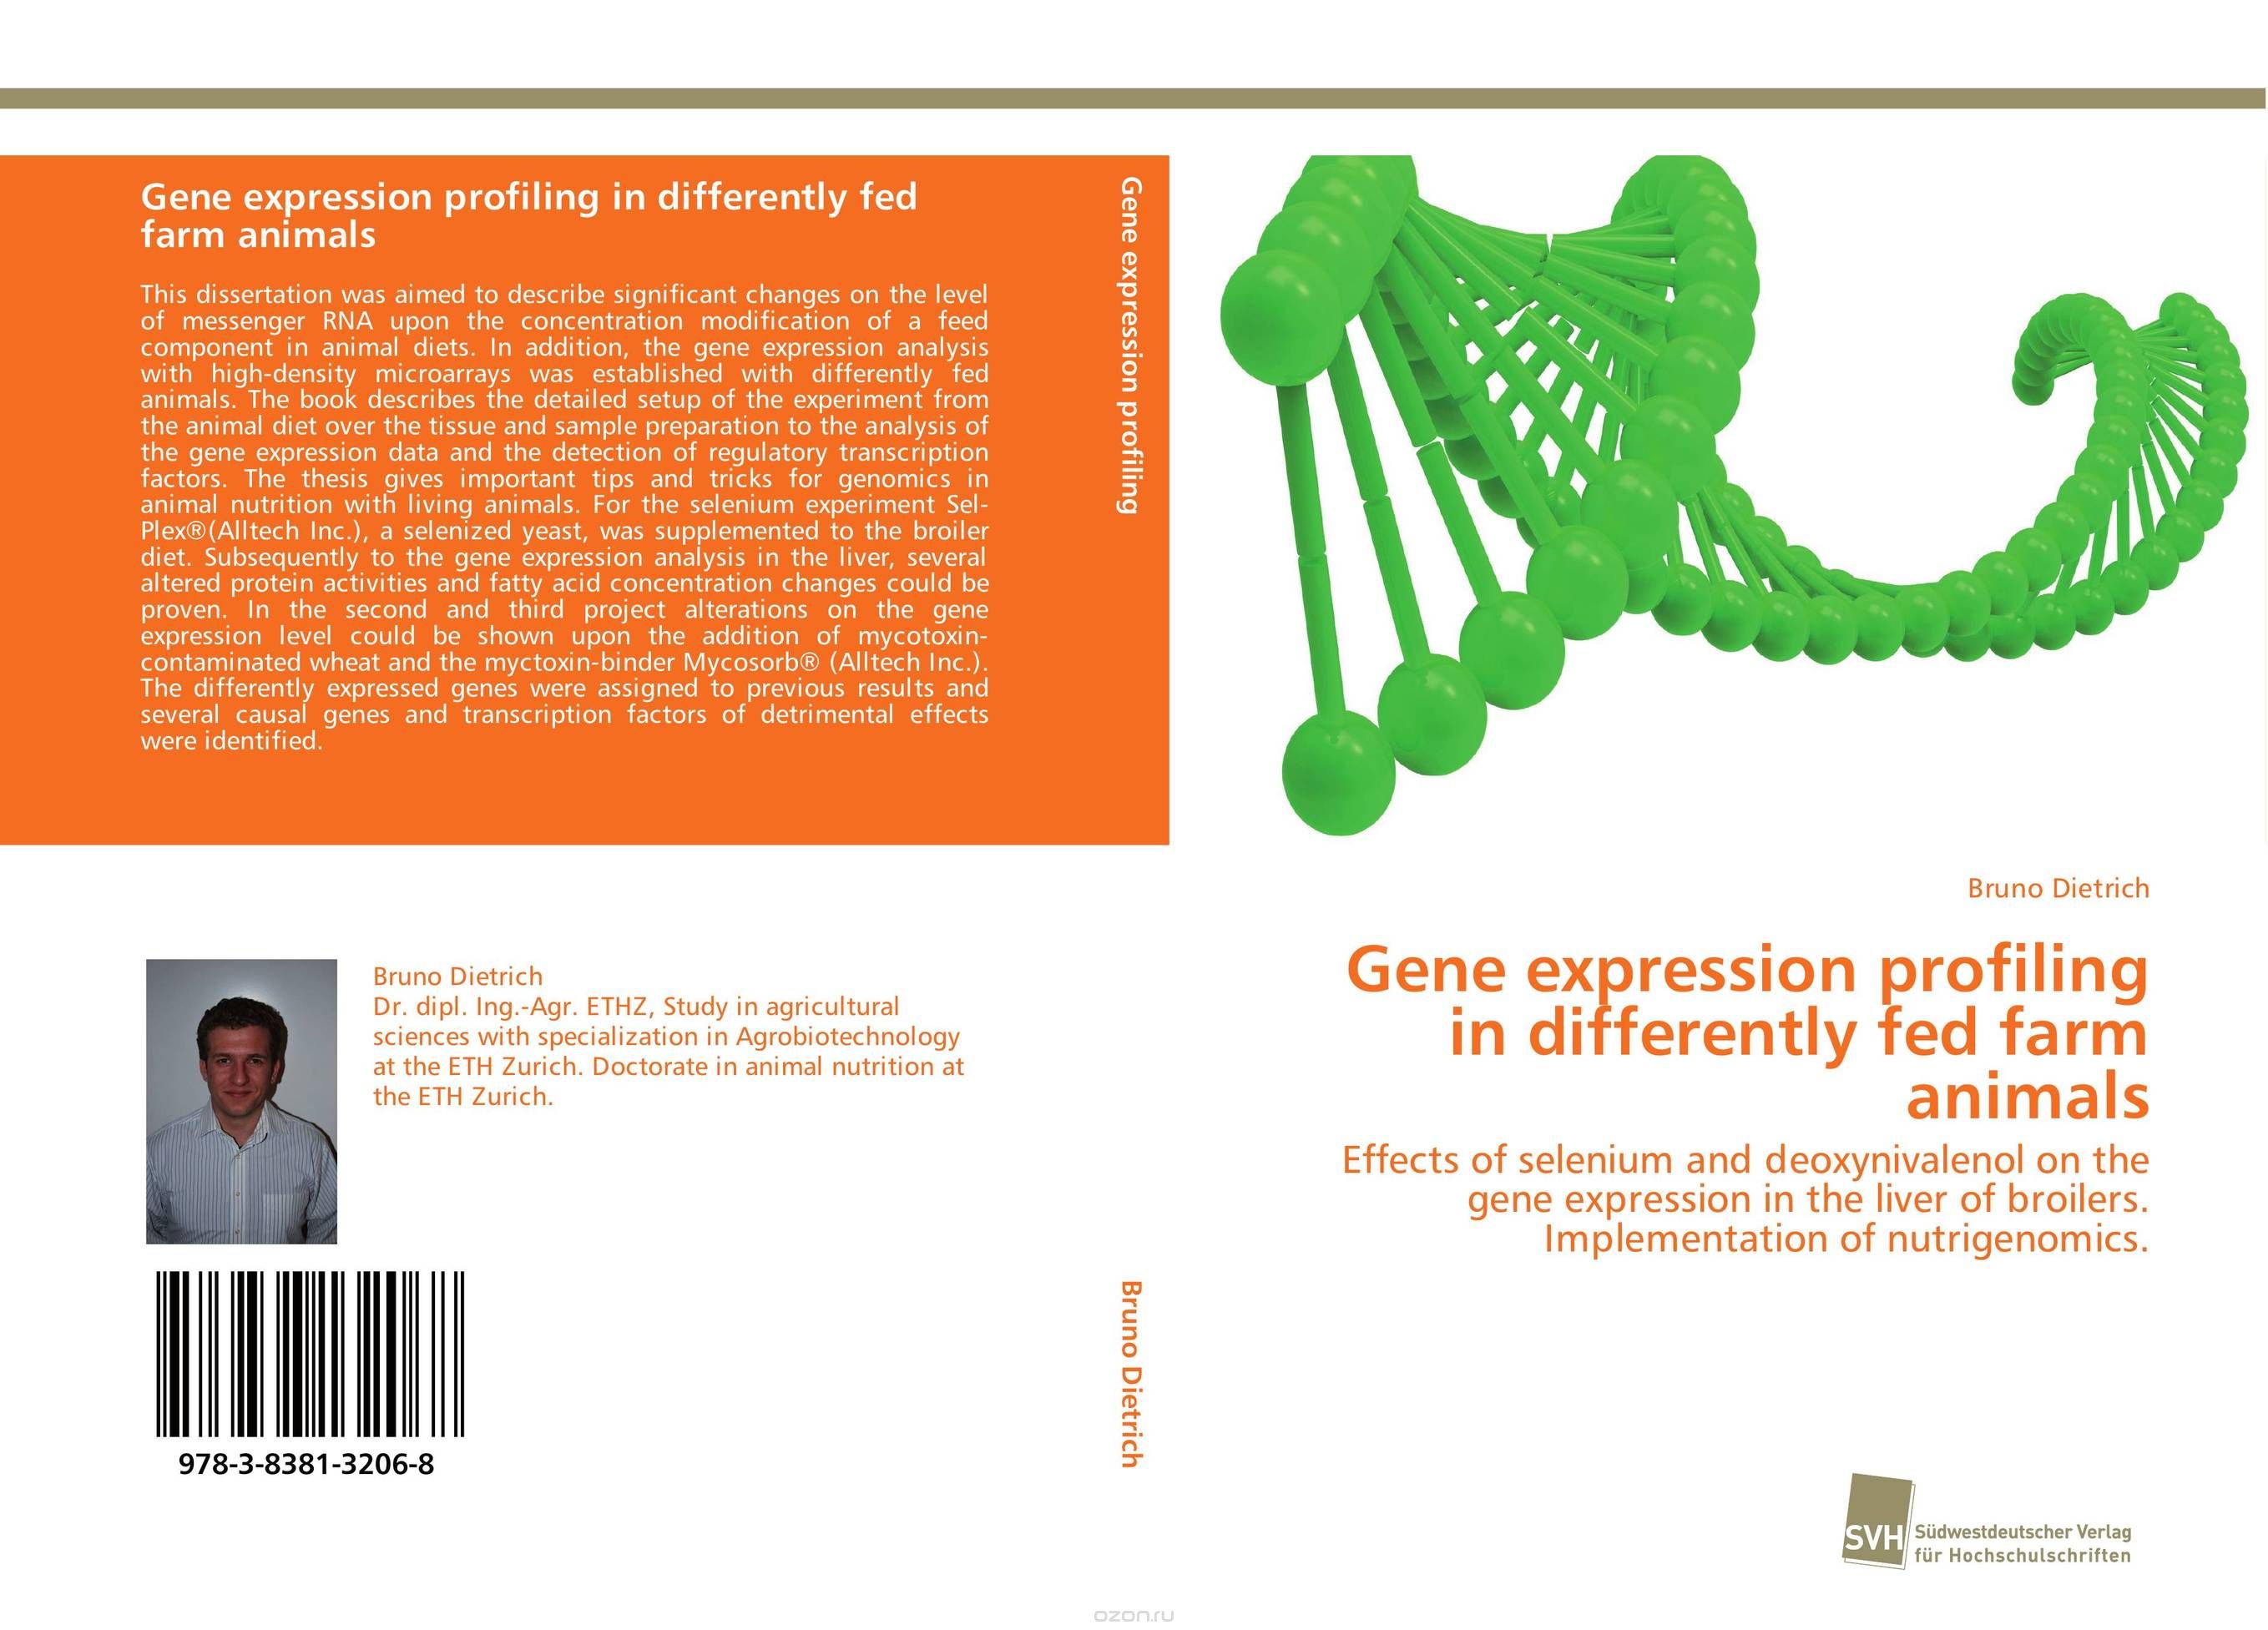 Gene expression profiling in differently fed farm animals